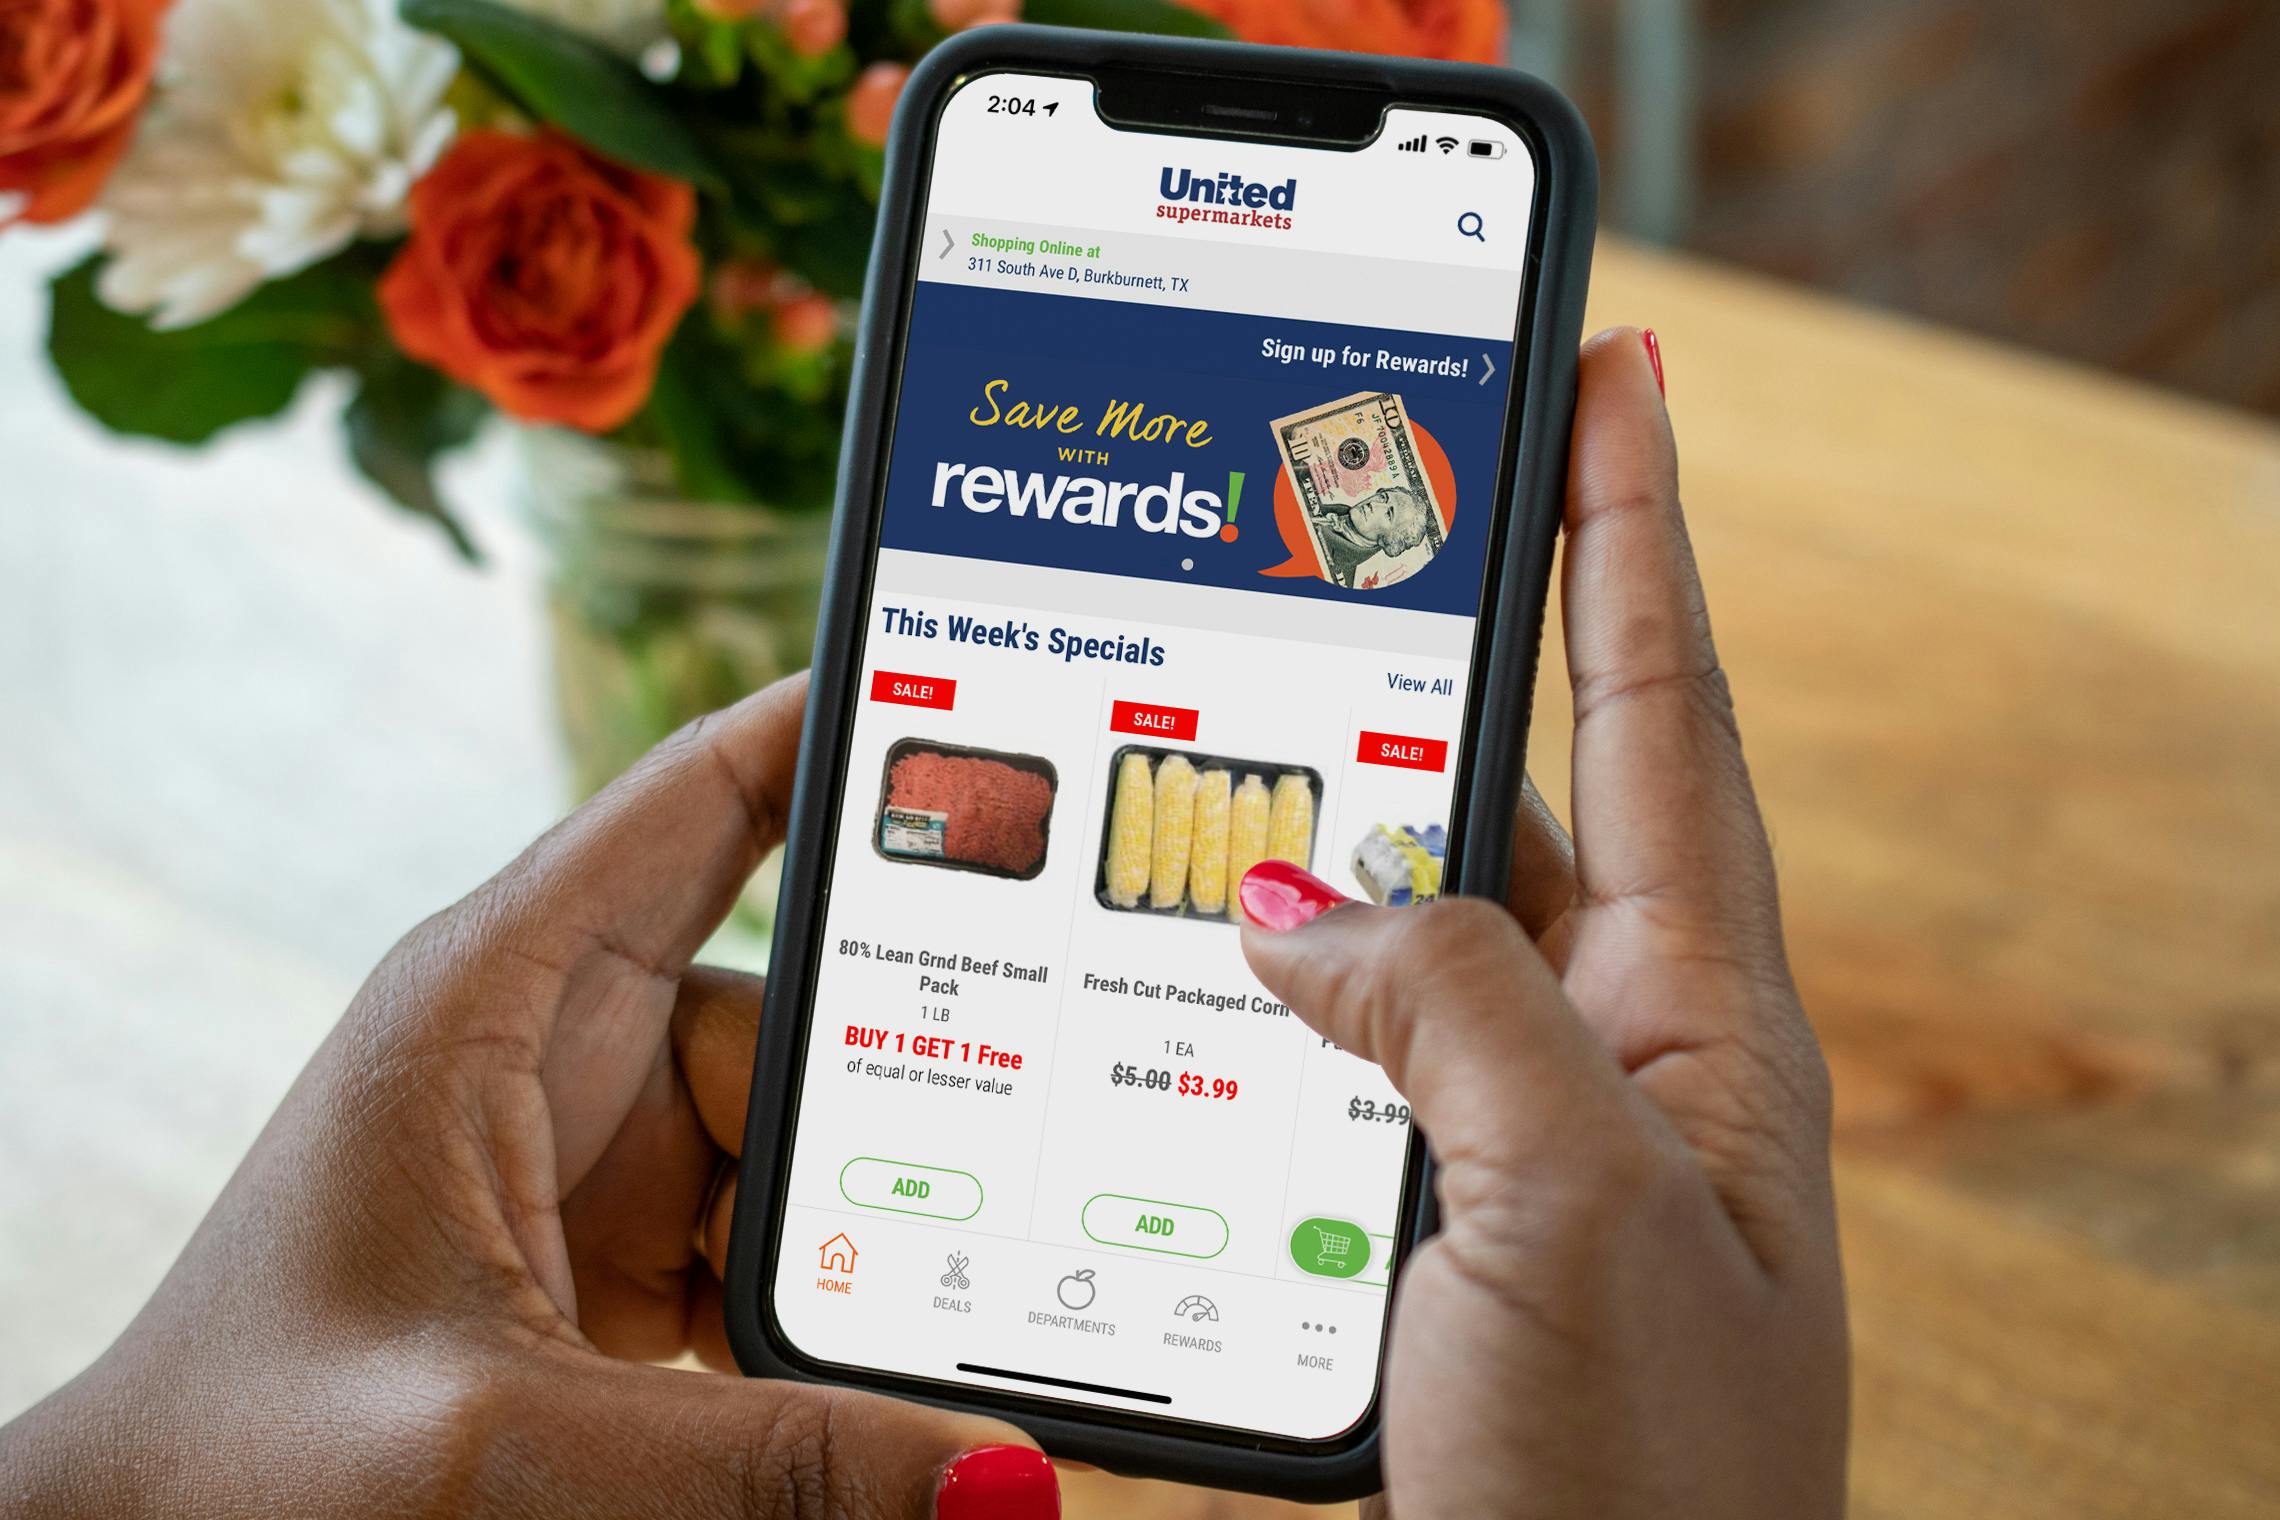 Your Ultimate Guide To Grocery Store App Digital Coupons The Krazy Coupon Lady